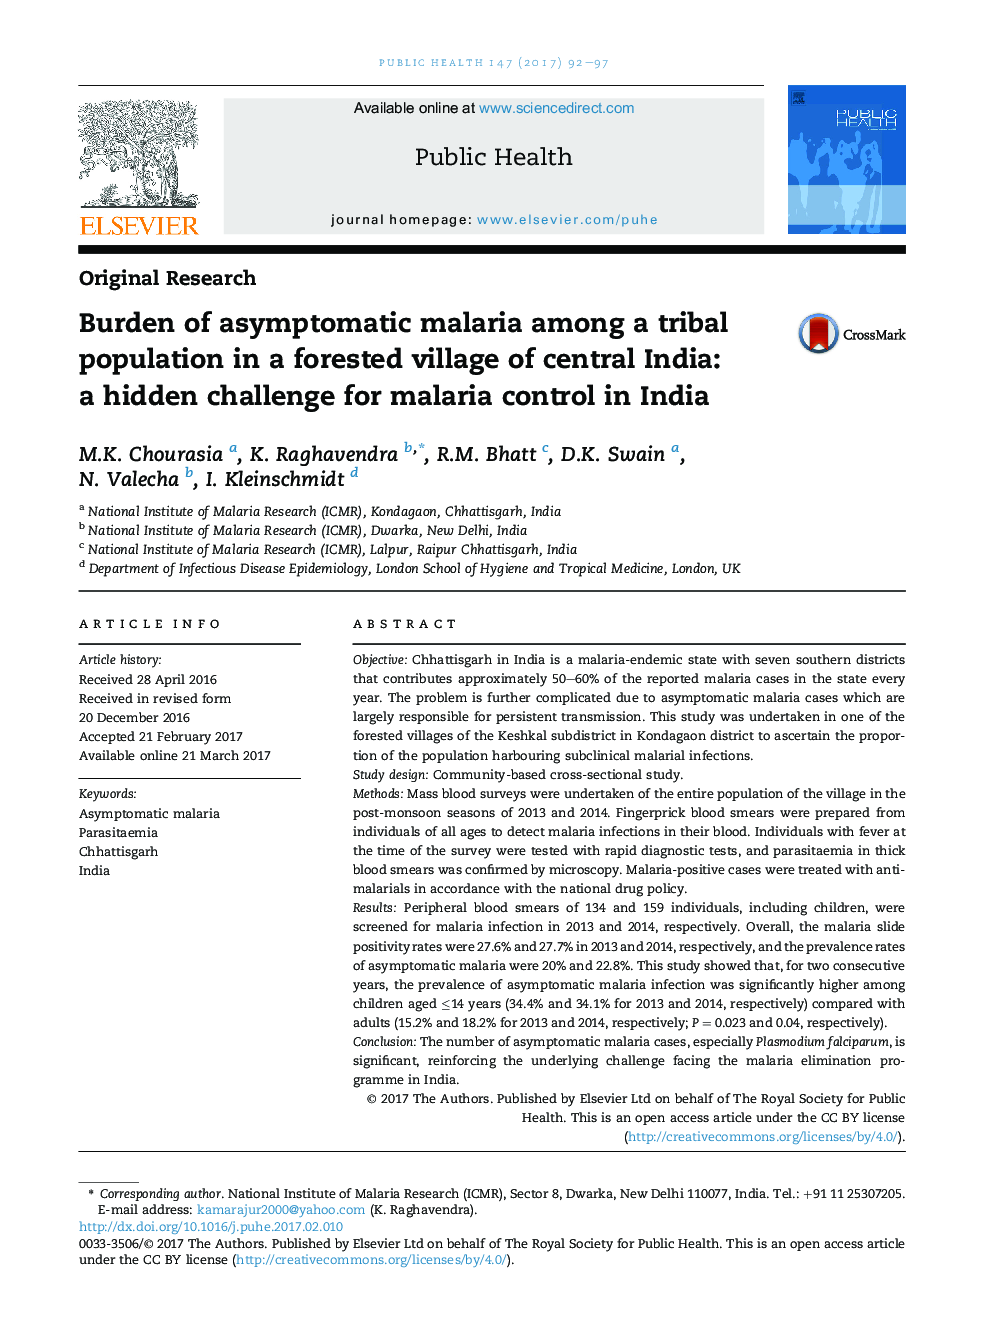 Burden of asymptomatic malaria among a tribal population in a forested village of central India: aÂ hidden challenge for malaria control in India